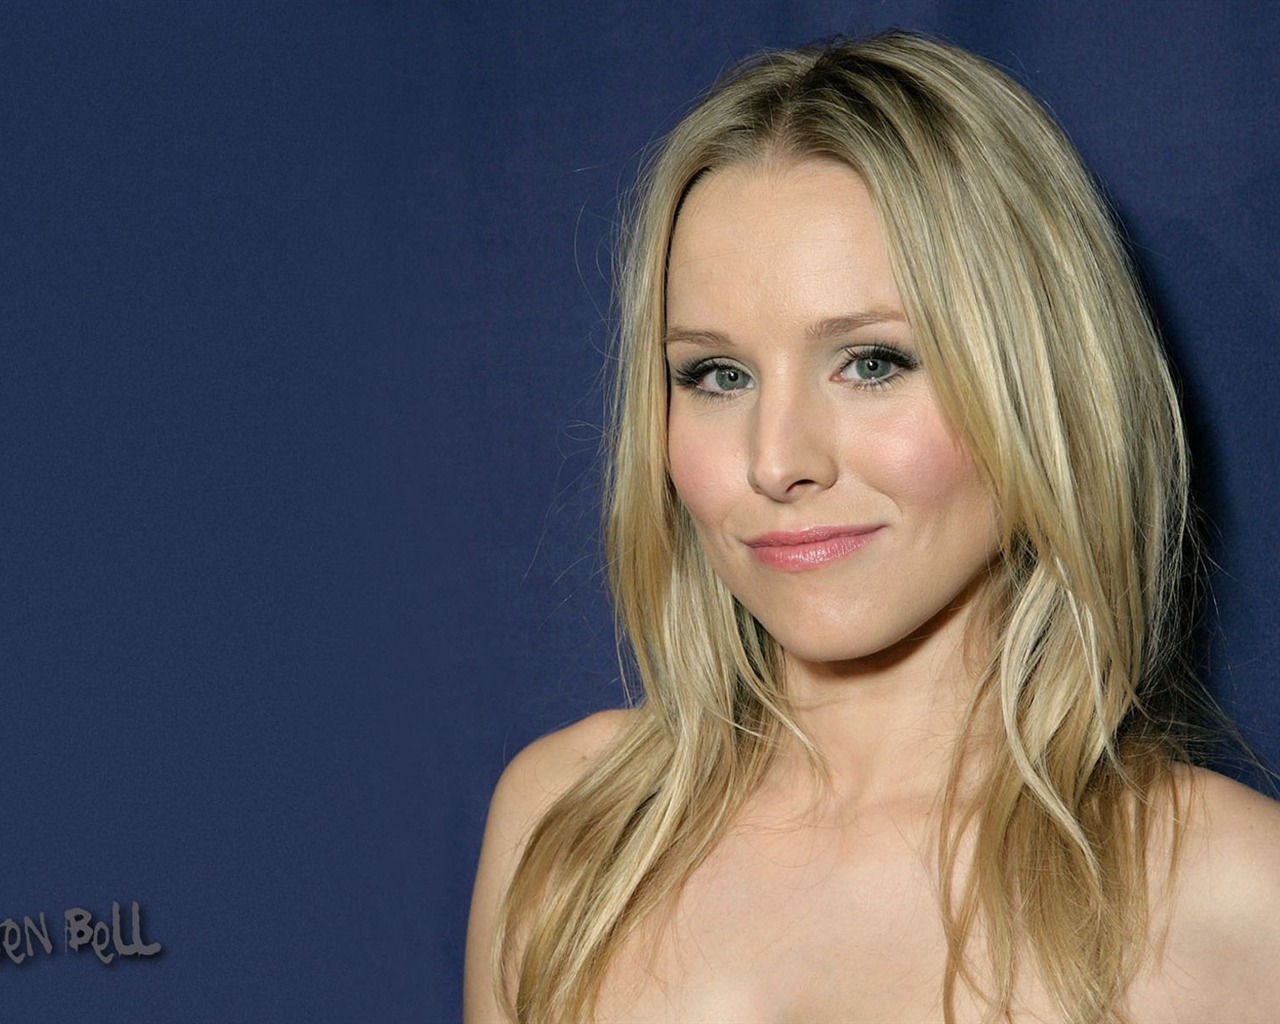 Kristen Bell #074 - 1280x1024 Wallpapers Pictures Photos Images